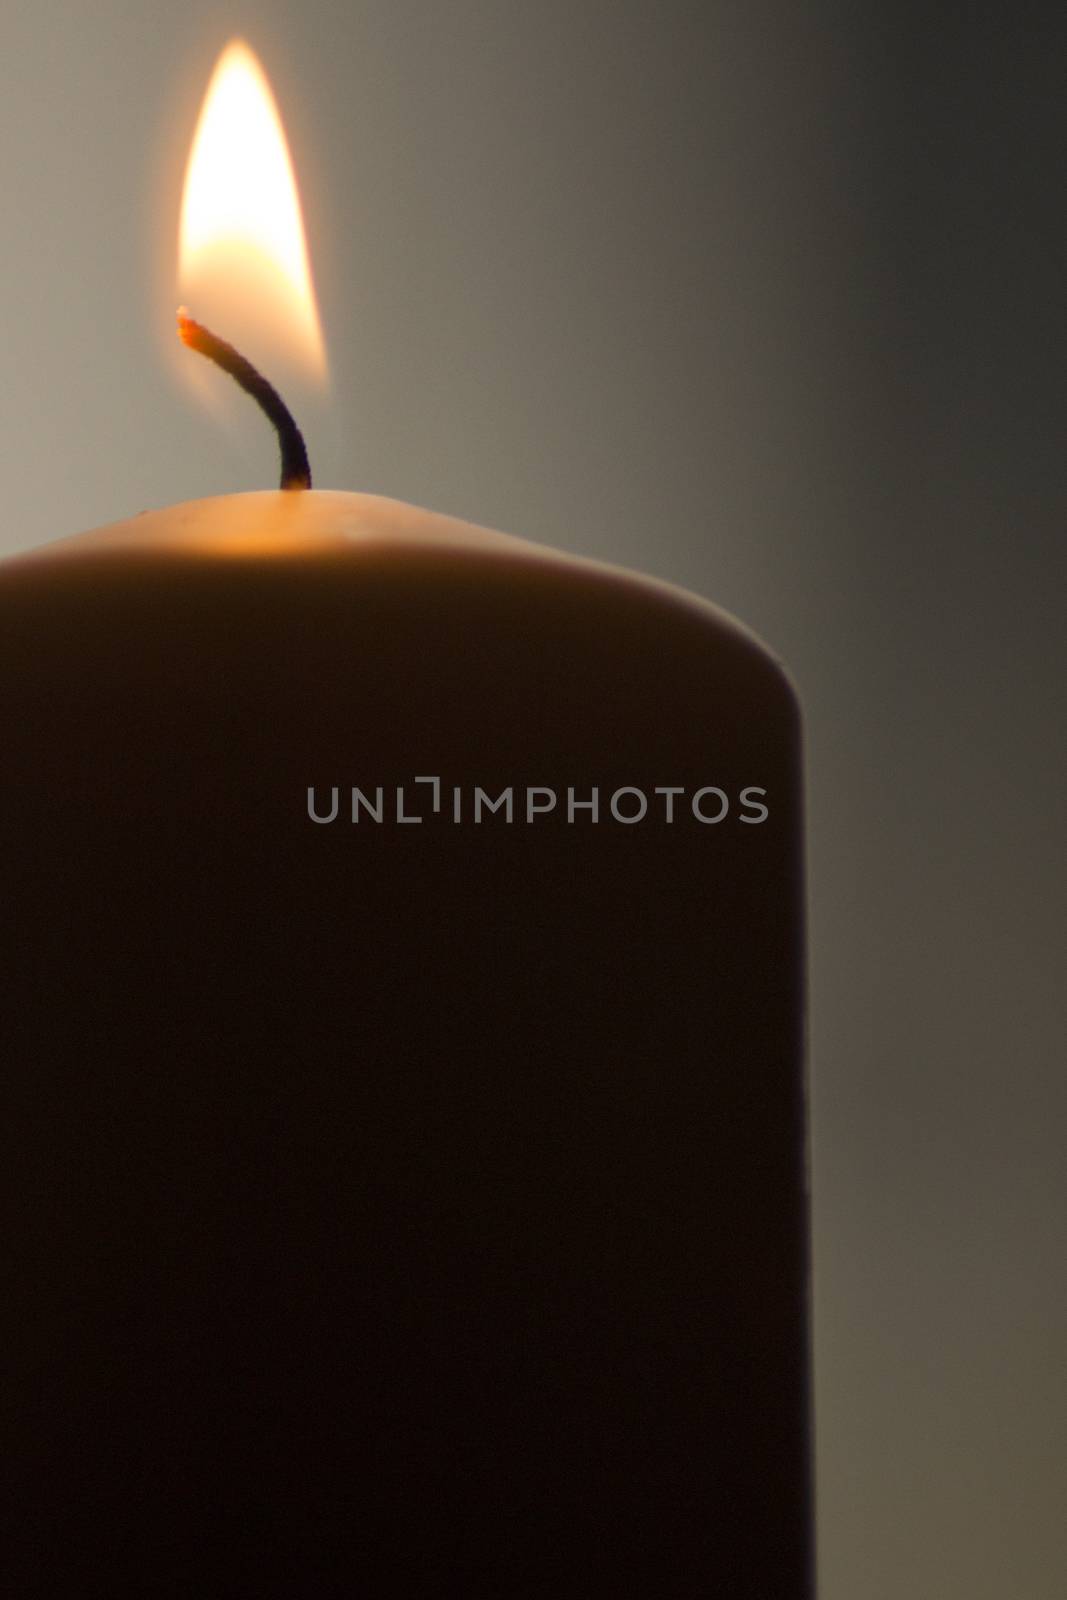 Candles burning giving off light close-up macro photo on plain background with copy space. 